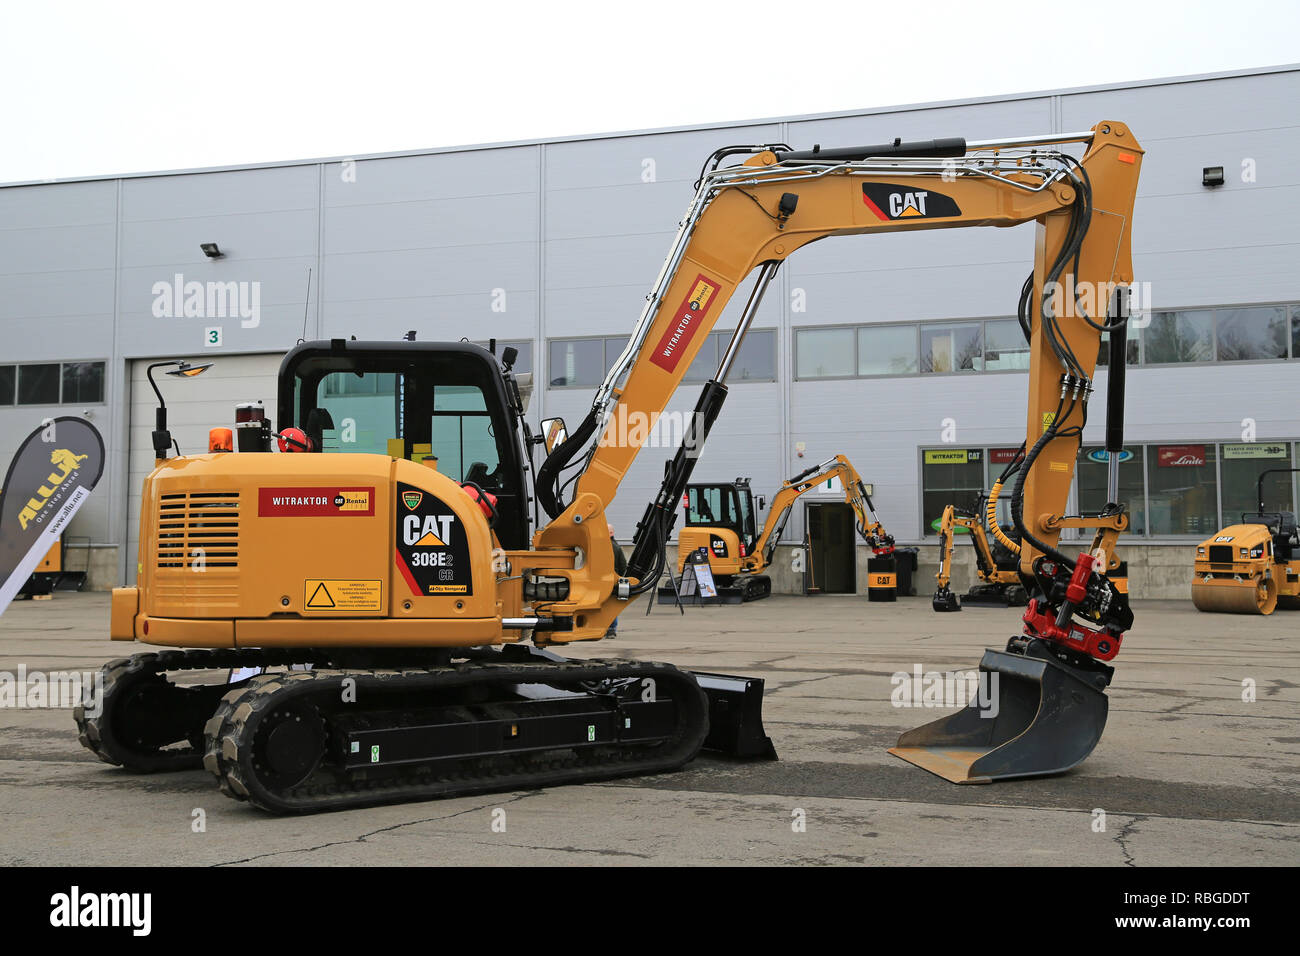 LIETO, FINLAND - MARCH 12, 2016: Cat 308E2 CR Mini Hydraulic Excavator with swing boom and other Cat construction equipment seen at the public event o Stock Photo